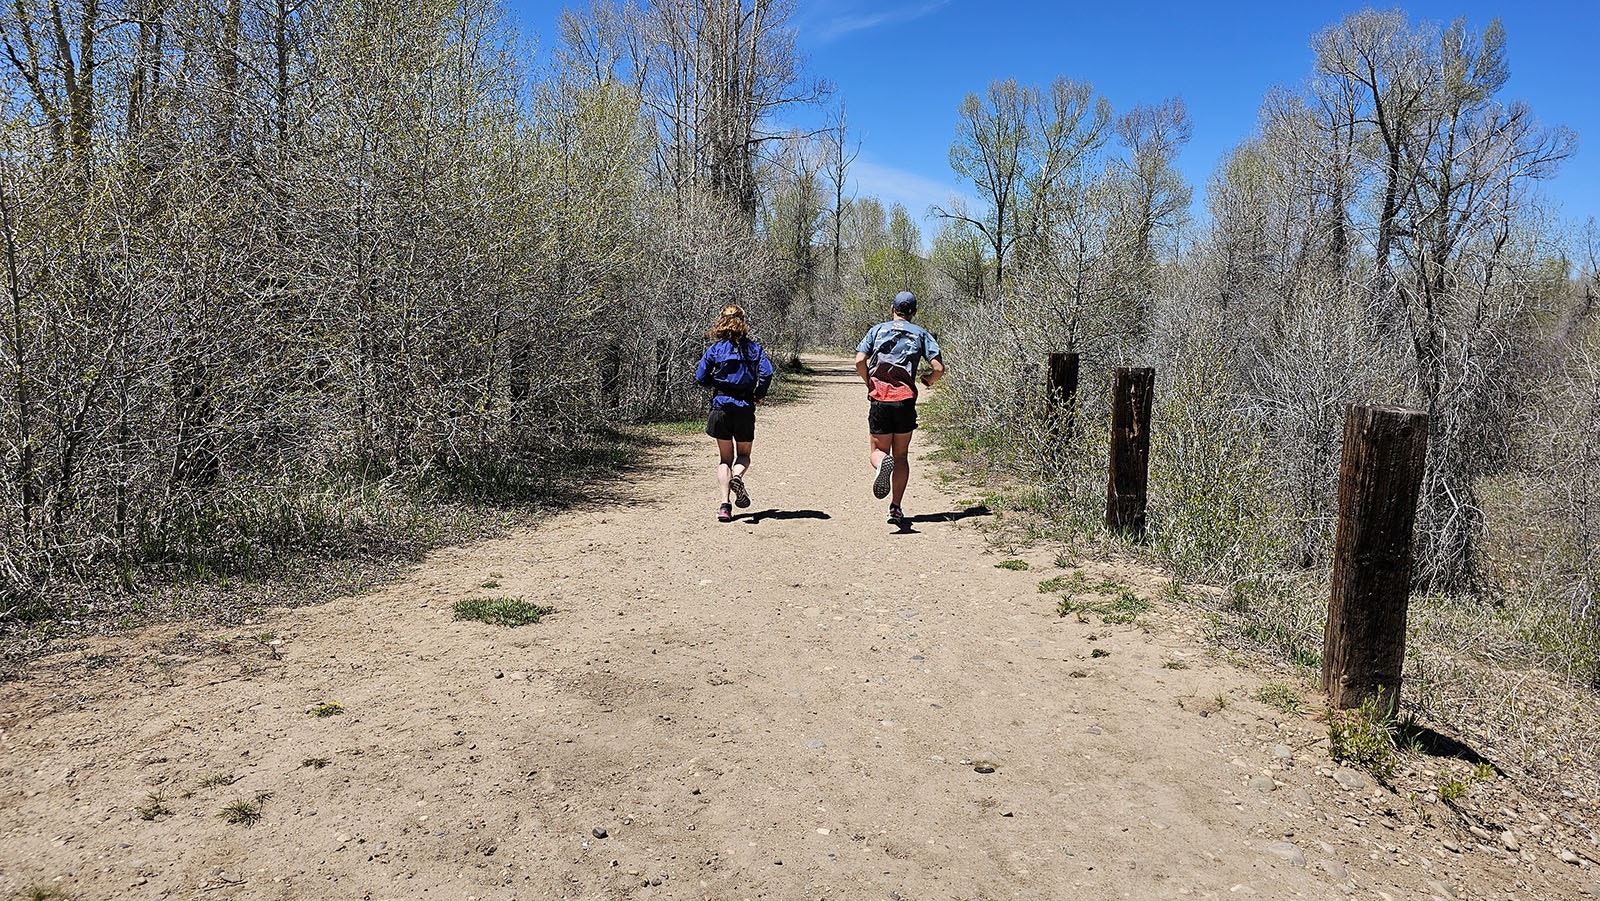 April Lange, here on a trail run with son Isaiah near the home in Evanston, Wyoming, last week.